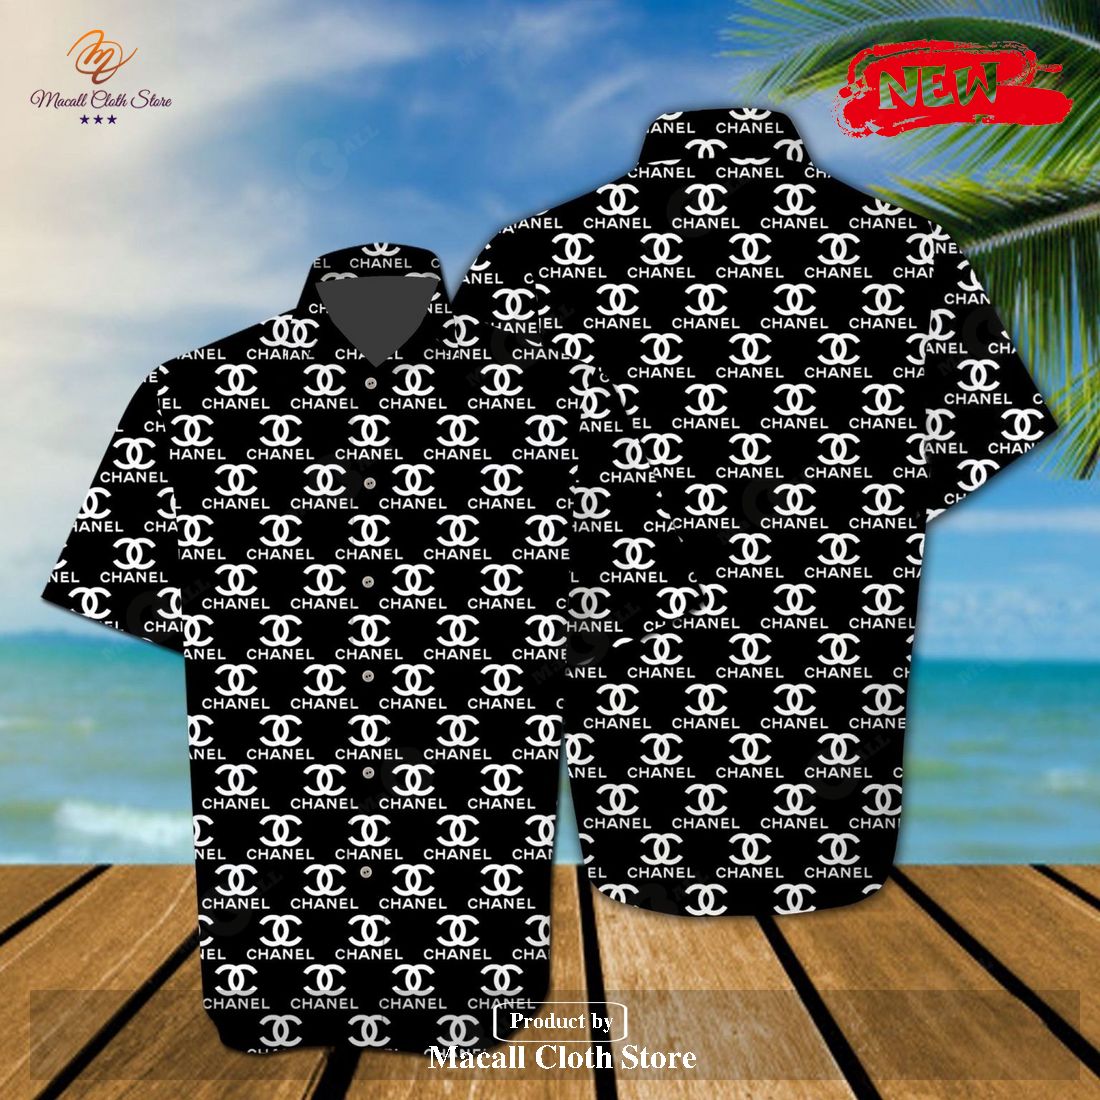 CN Hawaii Shirt and Short Set Luxury Chanel Clothing Clothes Outfit For ...